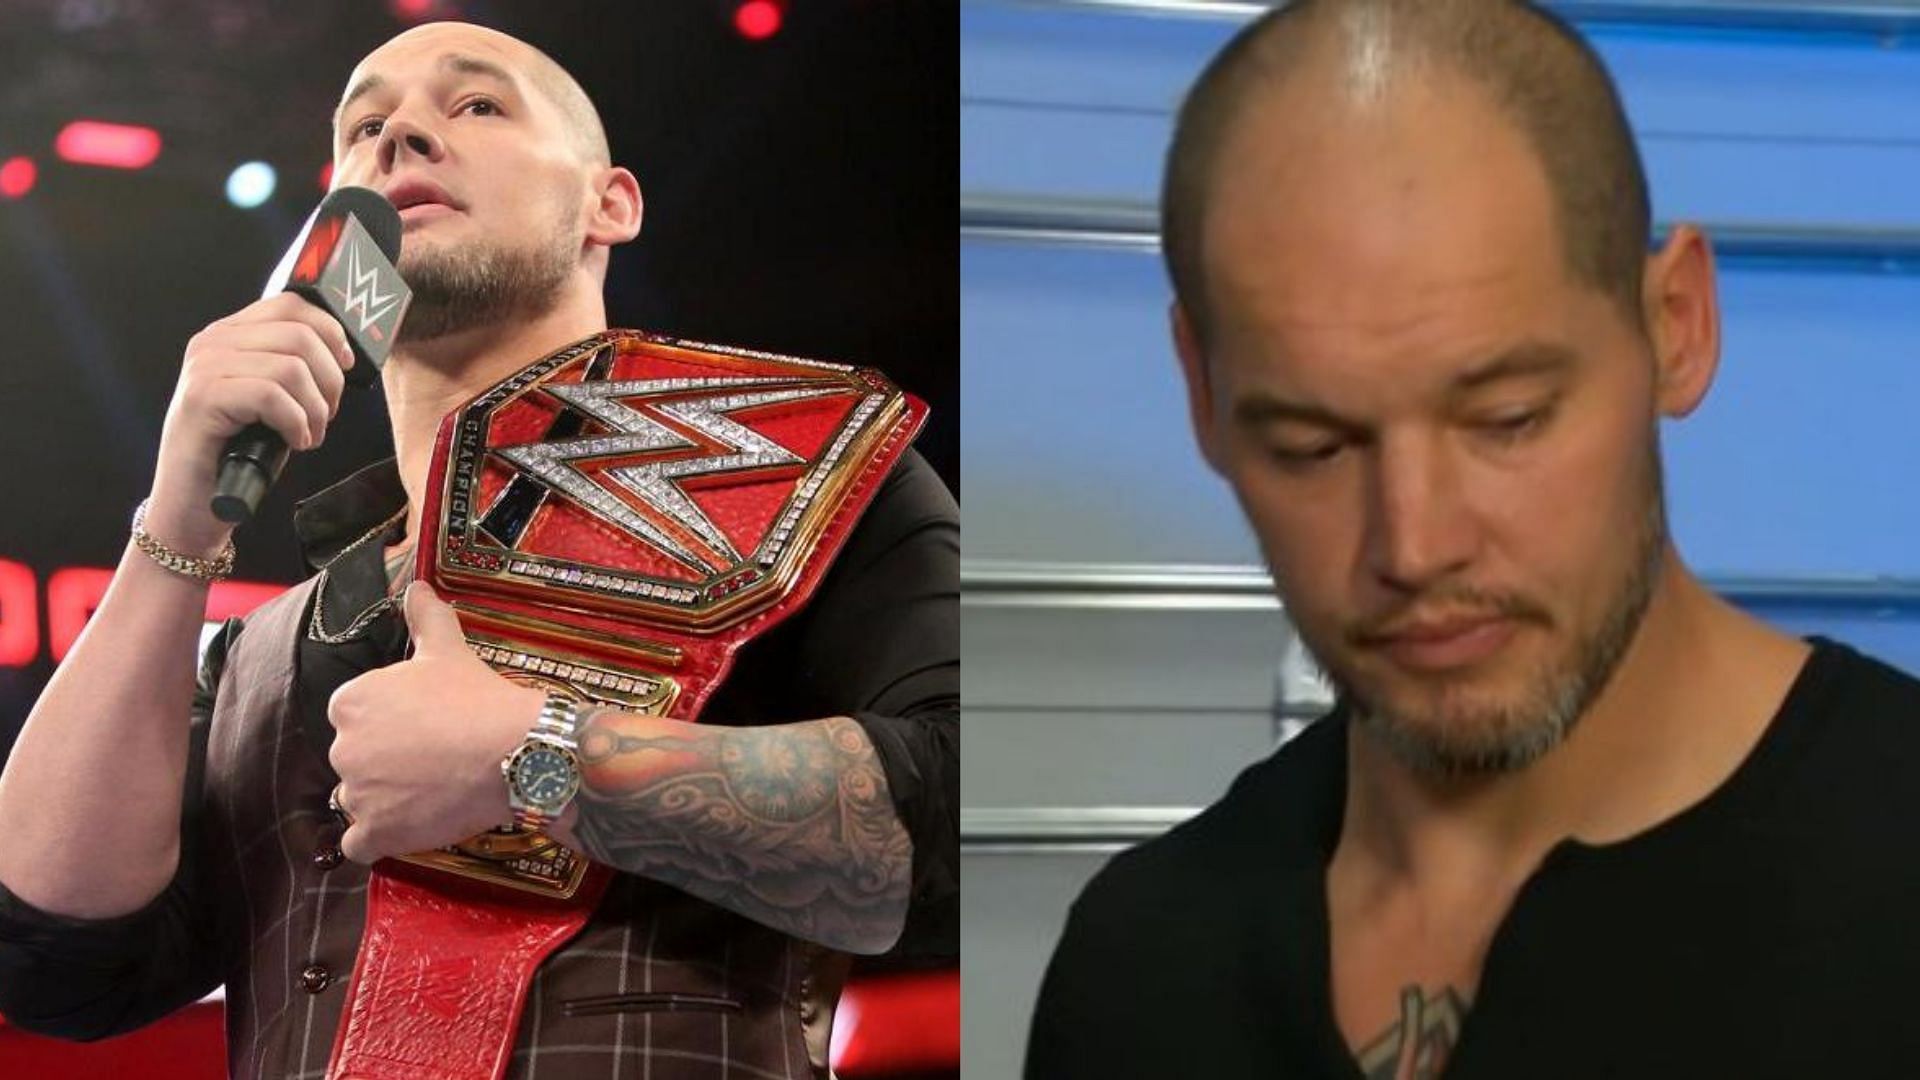 Could Baron Corbin turn things around for himself?